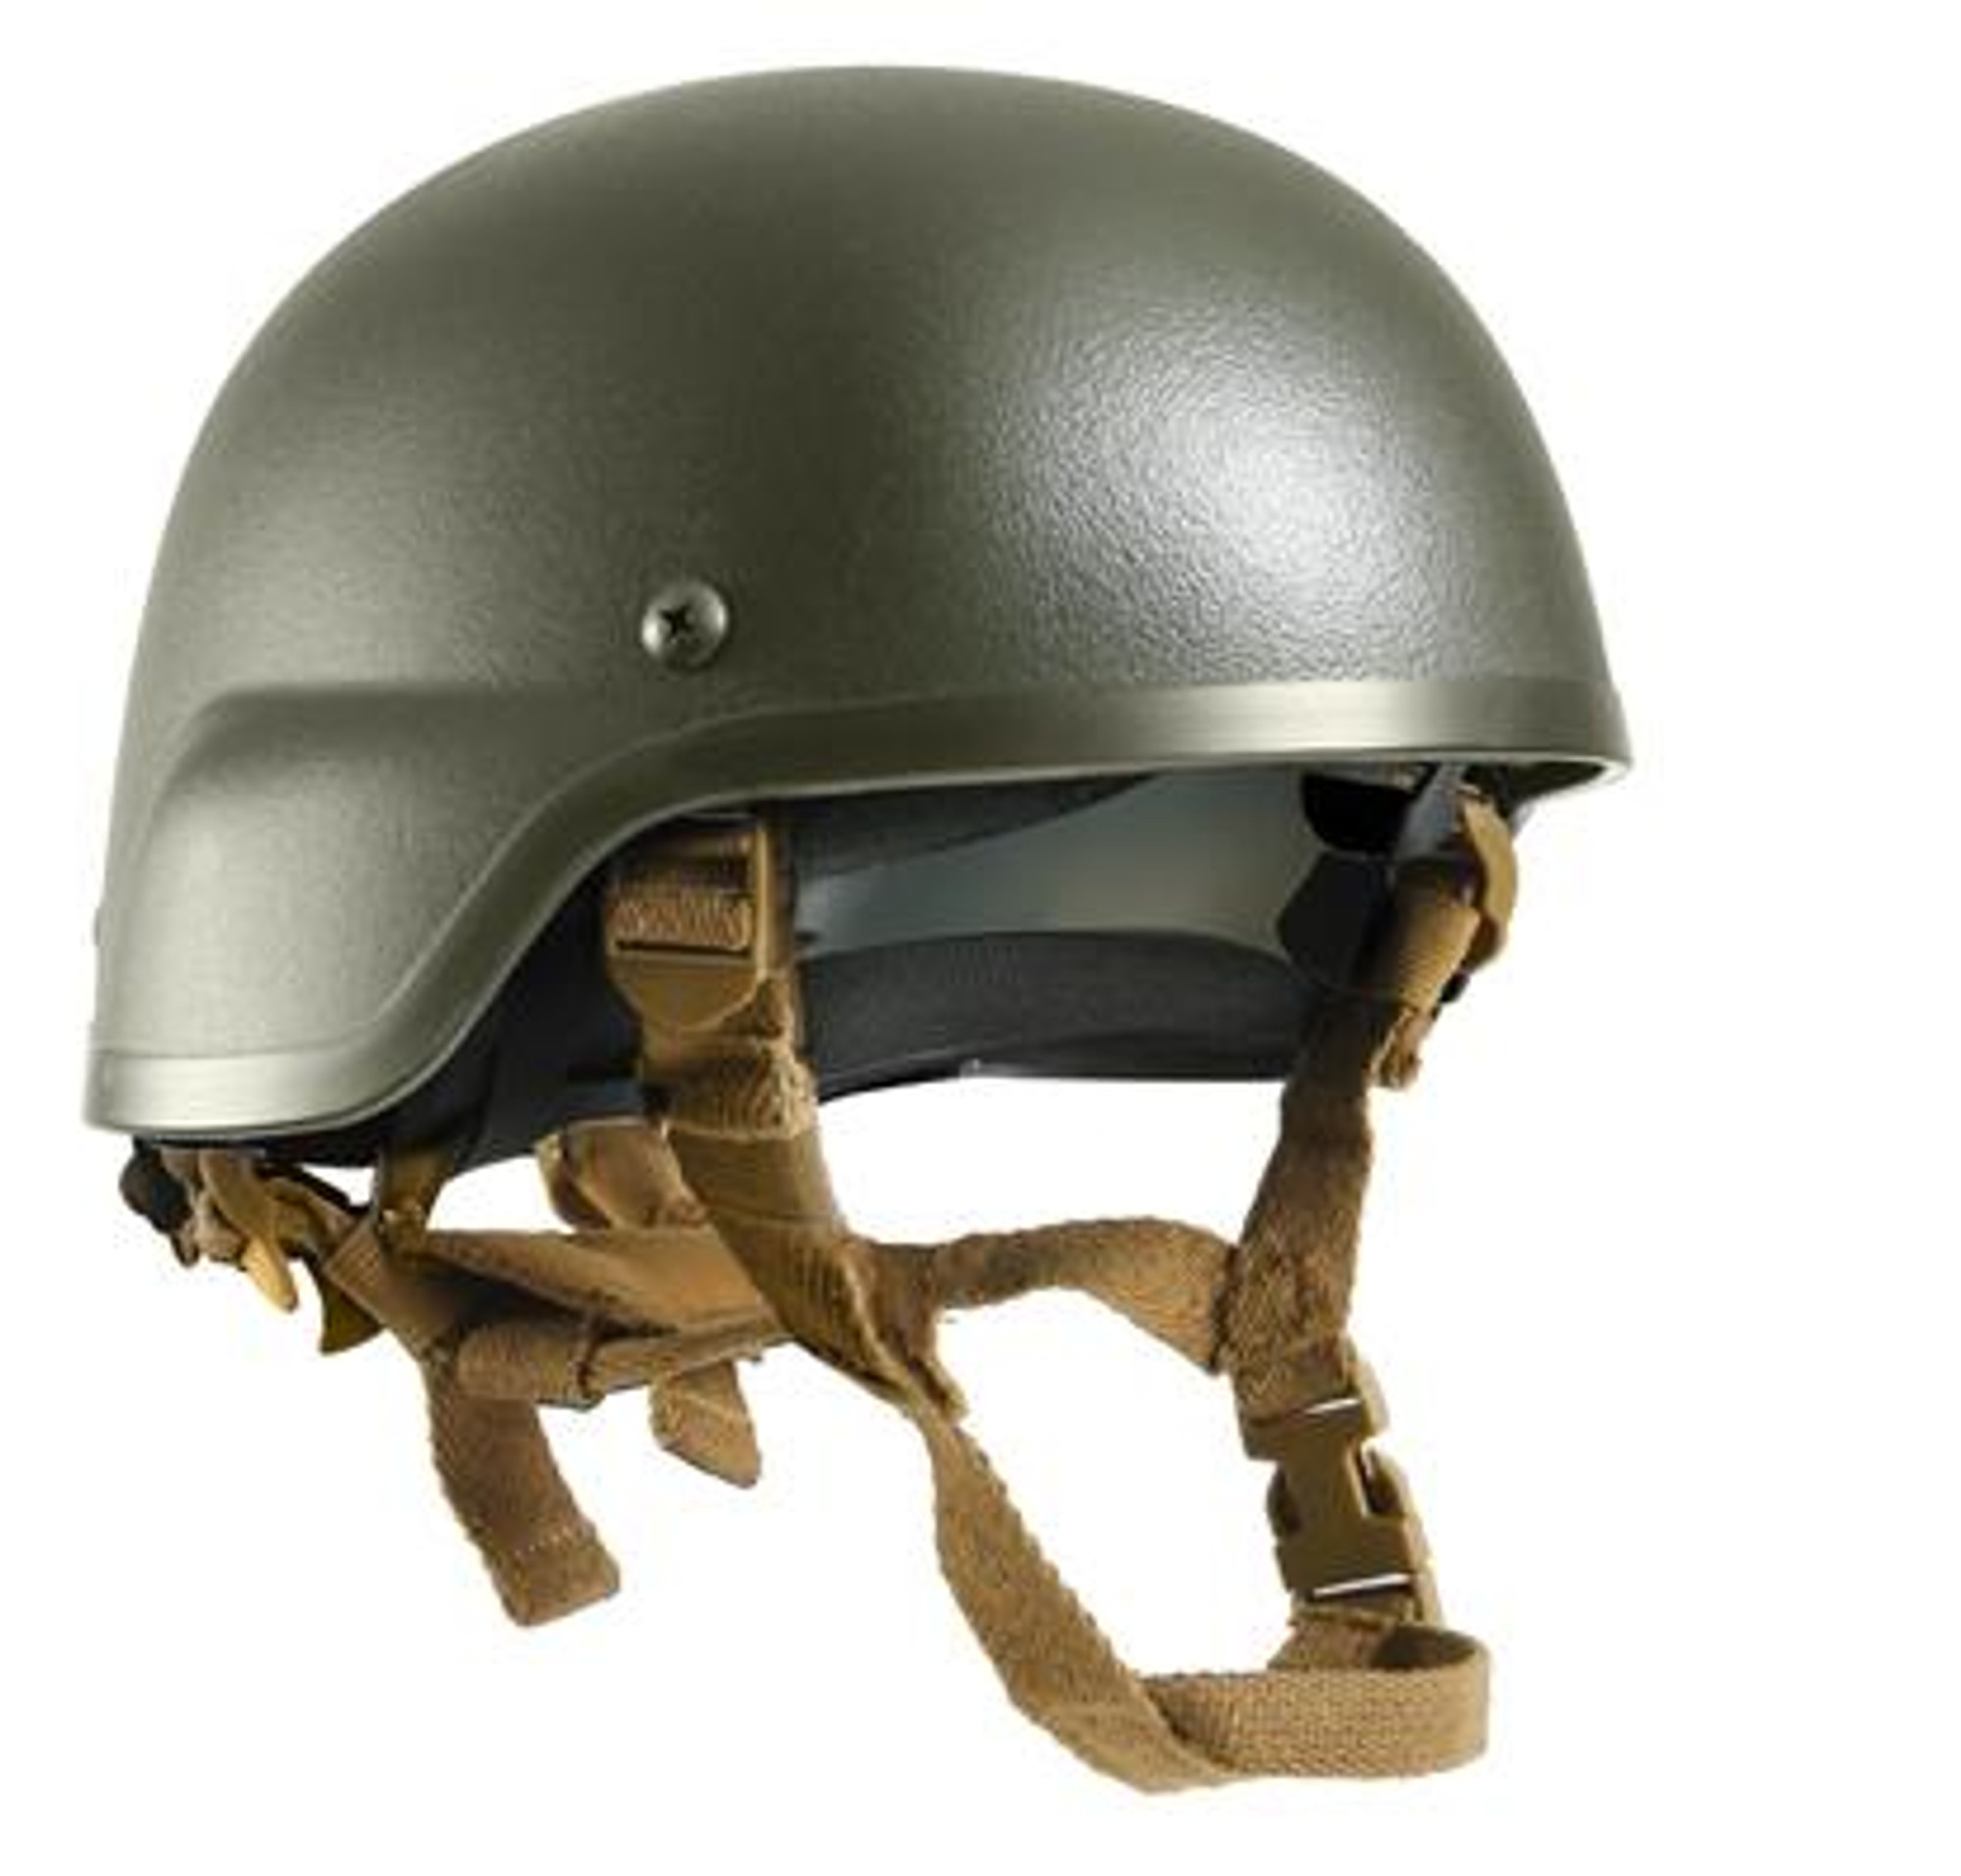 Rothco Chin Strap For MICH Helmet - Coyote Brown